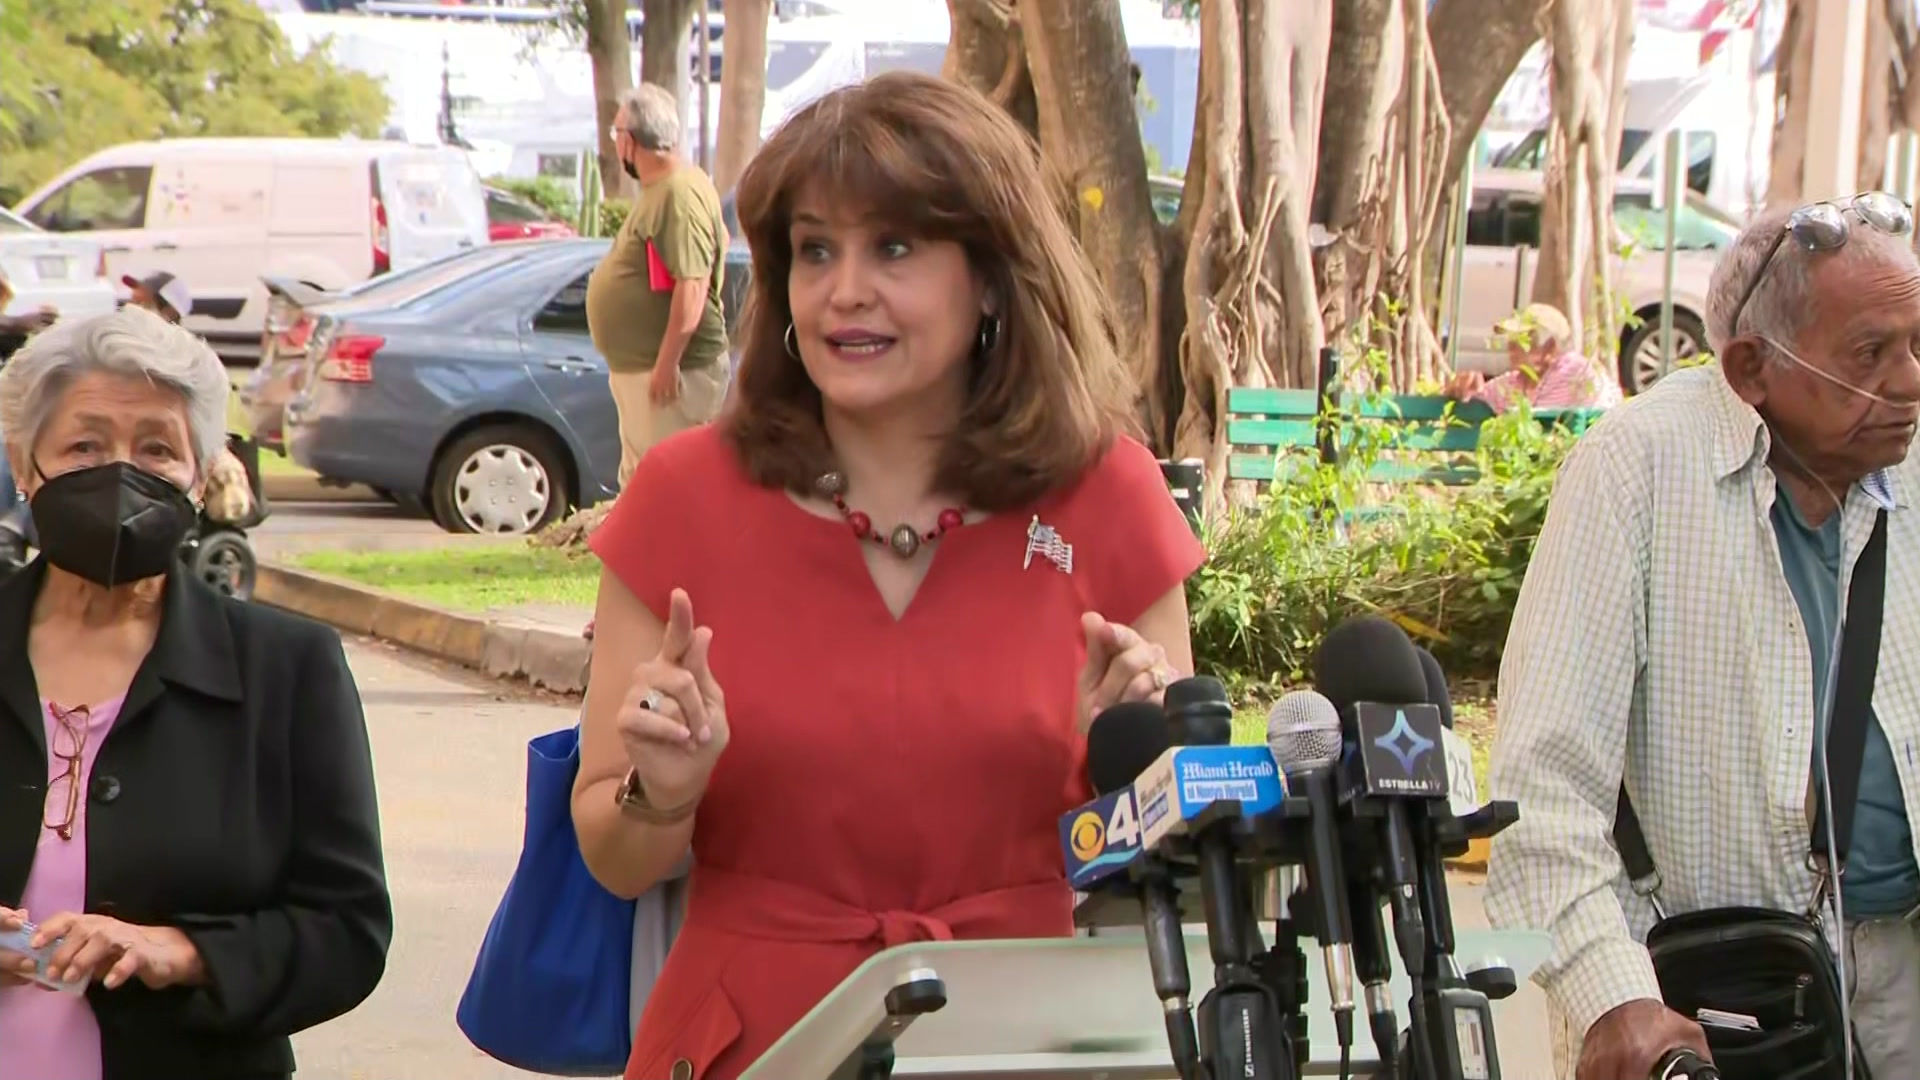 ‘This Is Wrong’: Florida Senator Annette Taddeo On Political Party Affiliation Changes Without Voters Knowledge